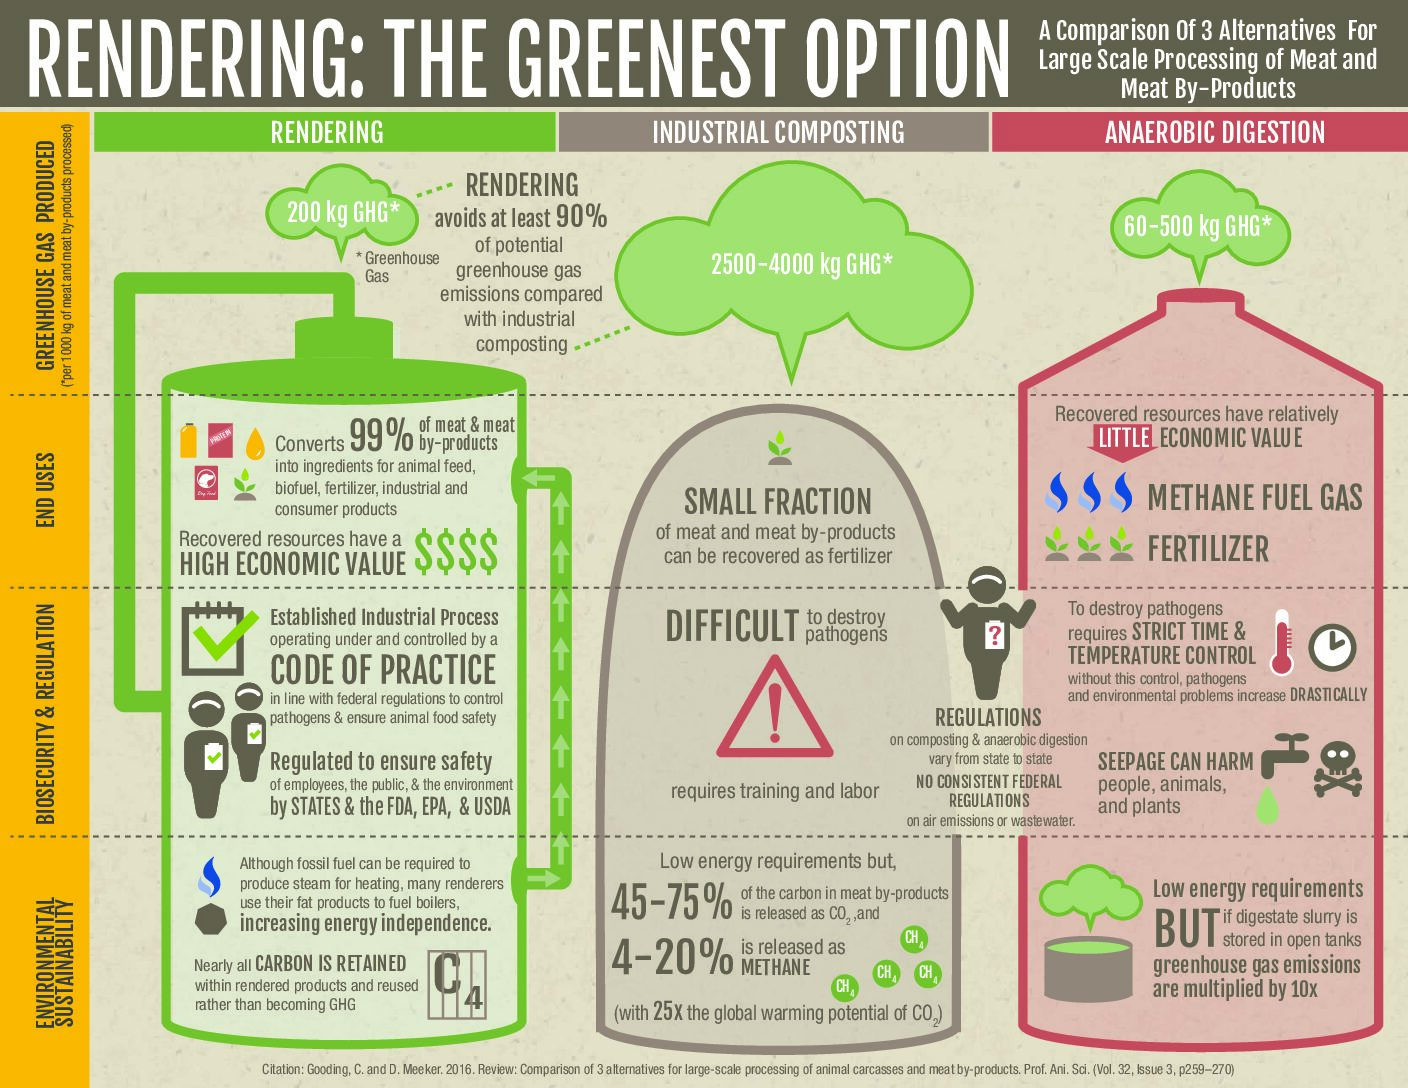 Rendering - The Greenest Option